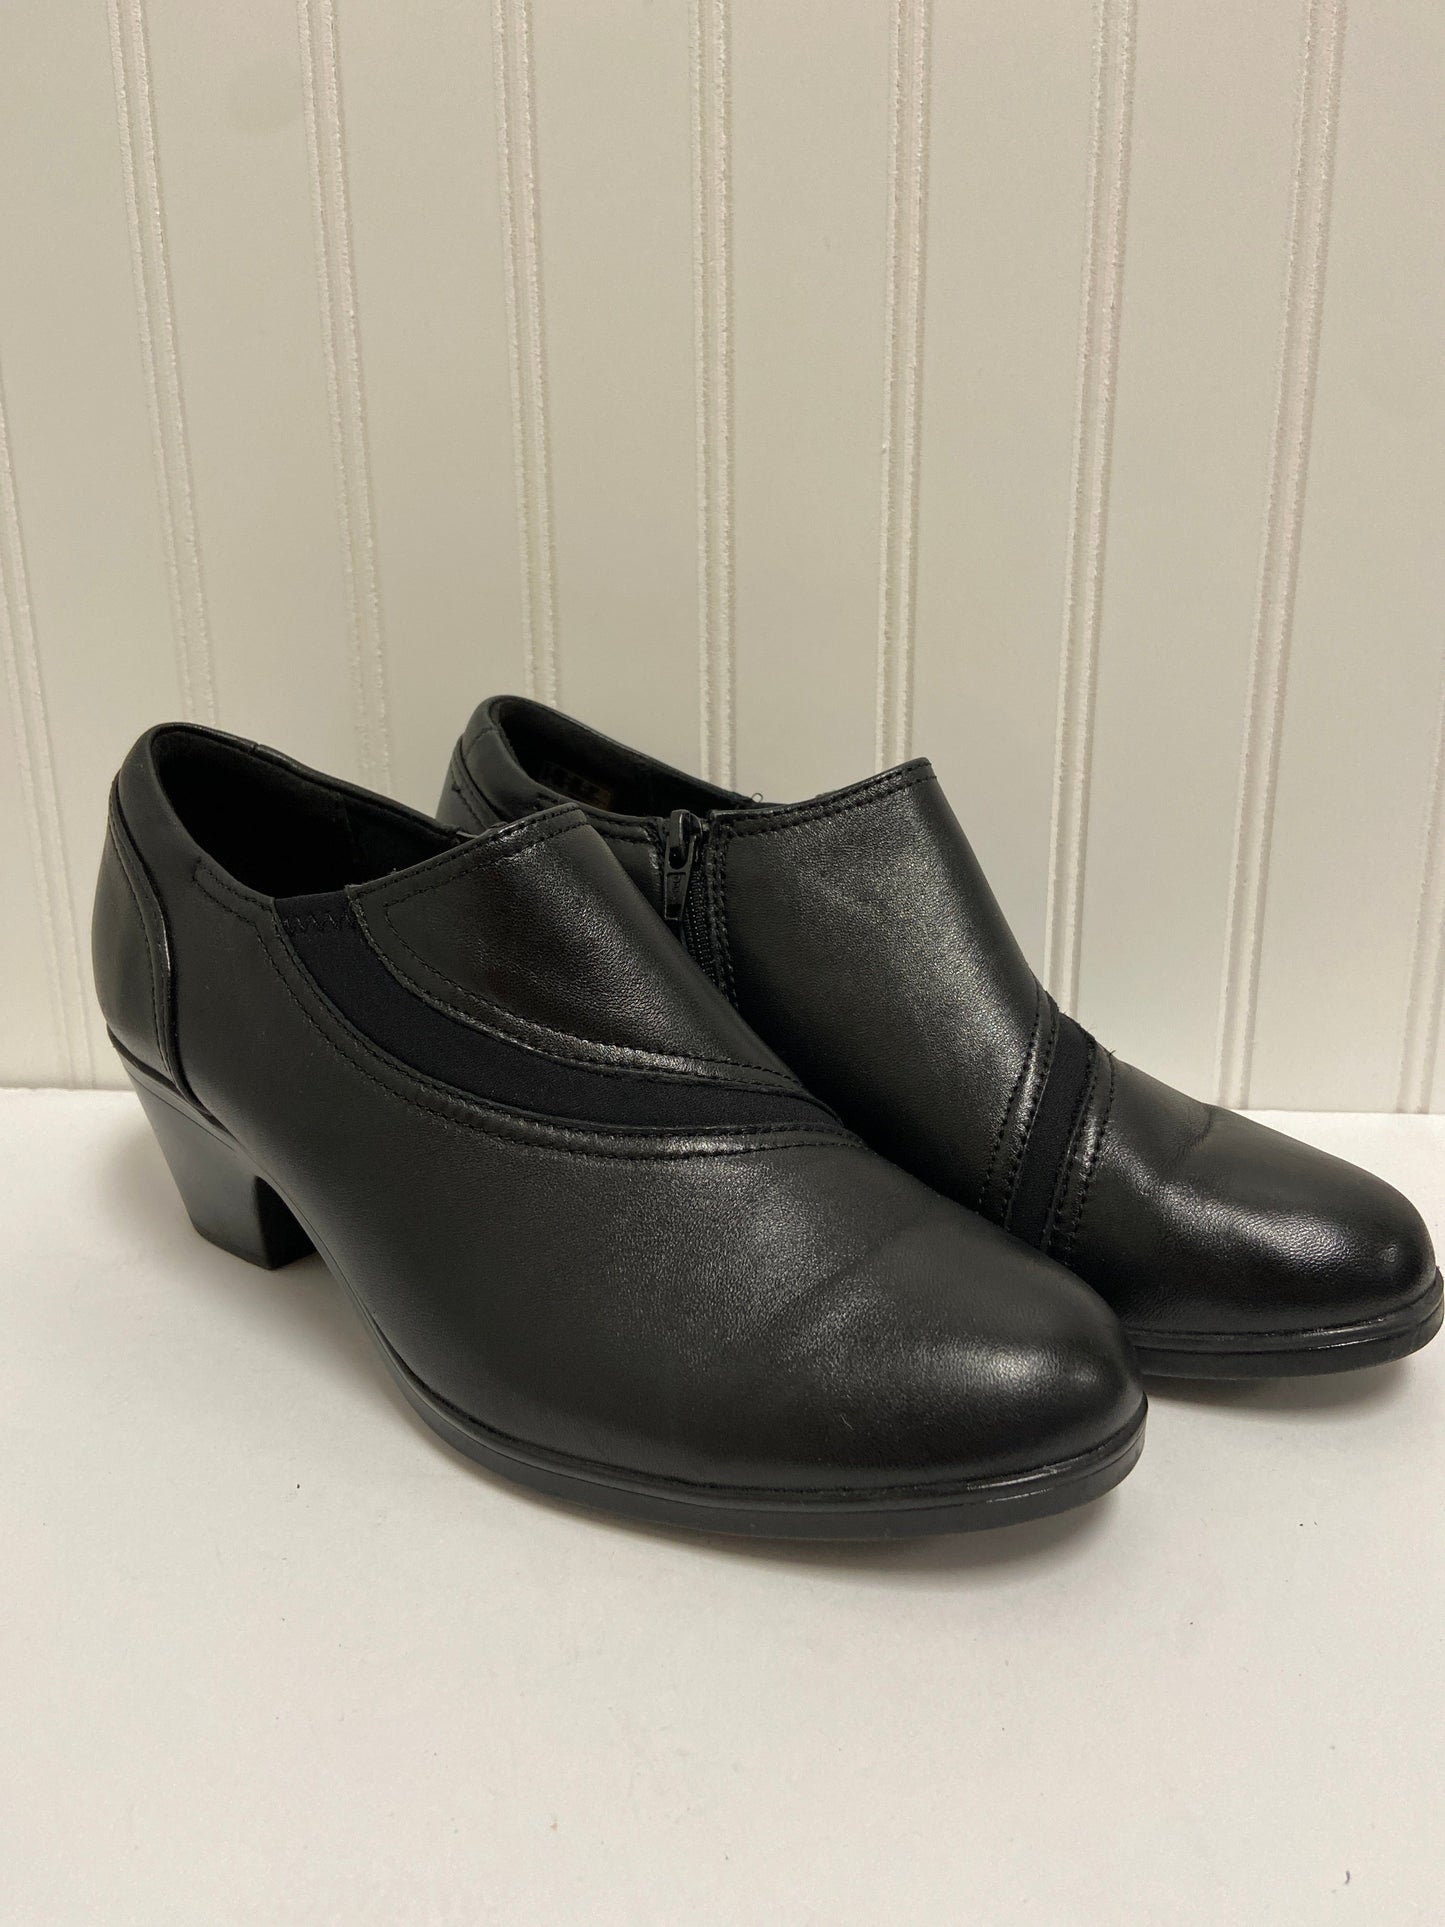 Shoes Heels Block By Clarks  Size: 9.5